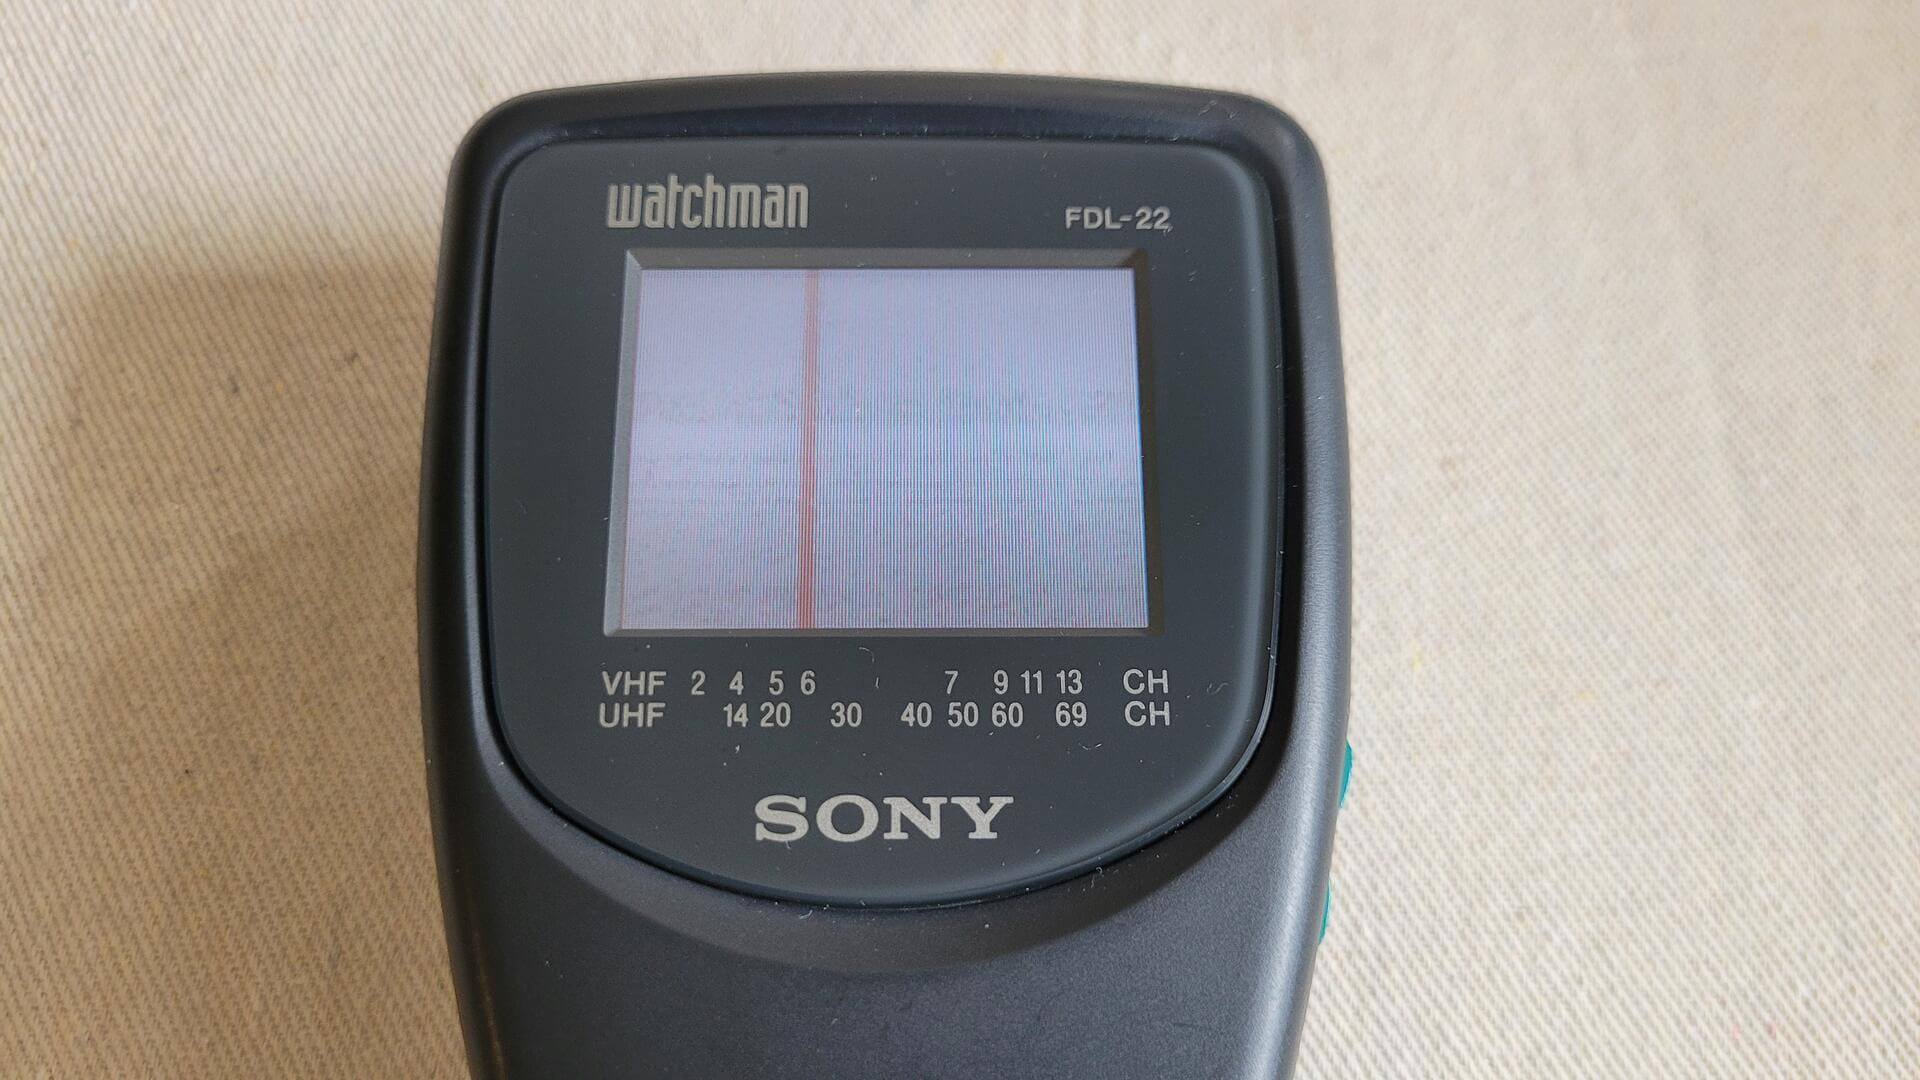 Sony Watchman FDL-22 LCD Analog mini hand held colour portable television with the strap. Vintage made in Japan collectible electronic gadgets